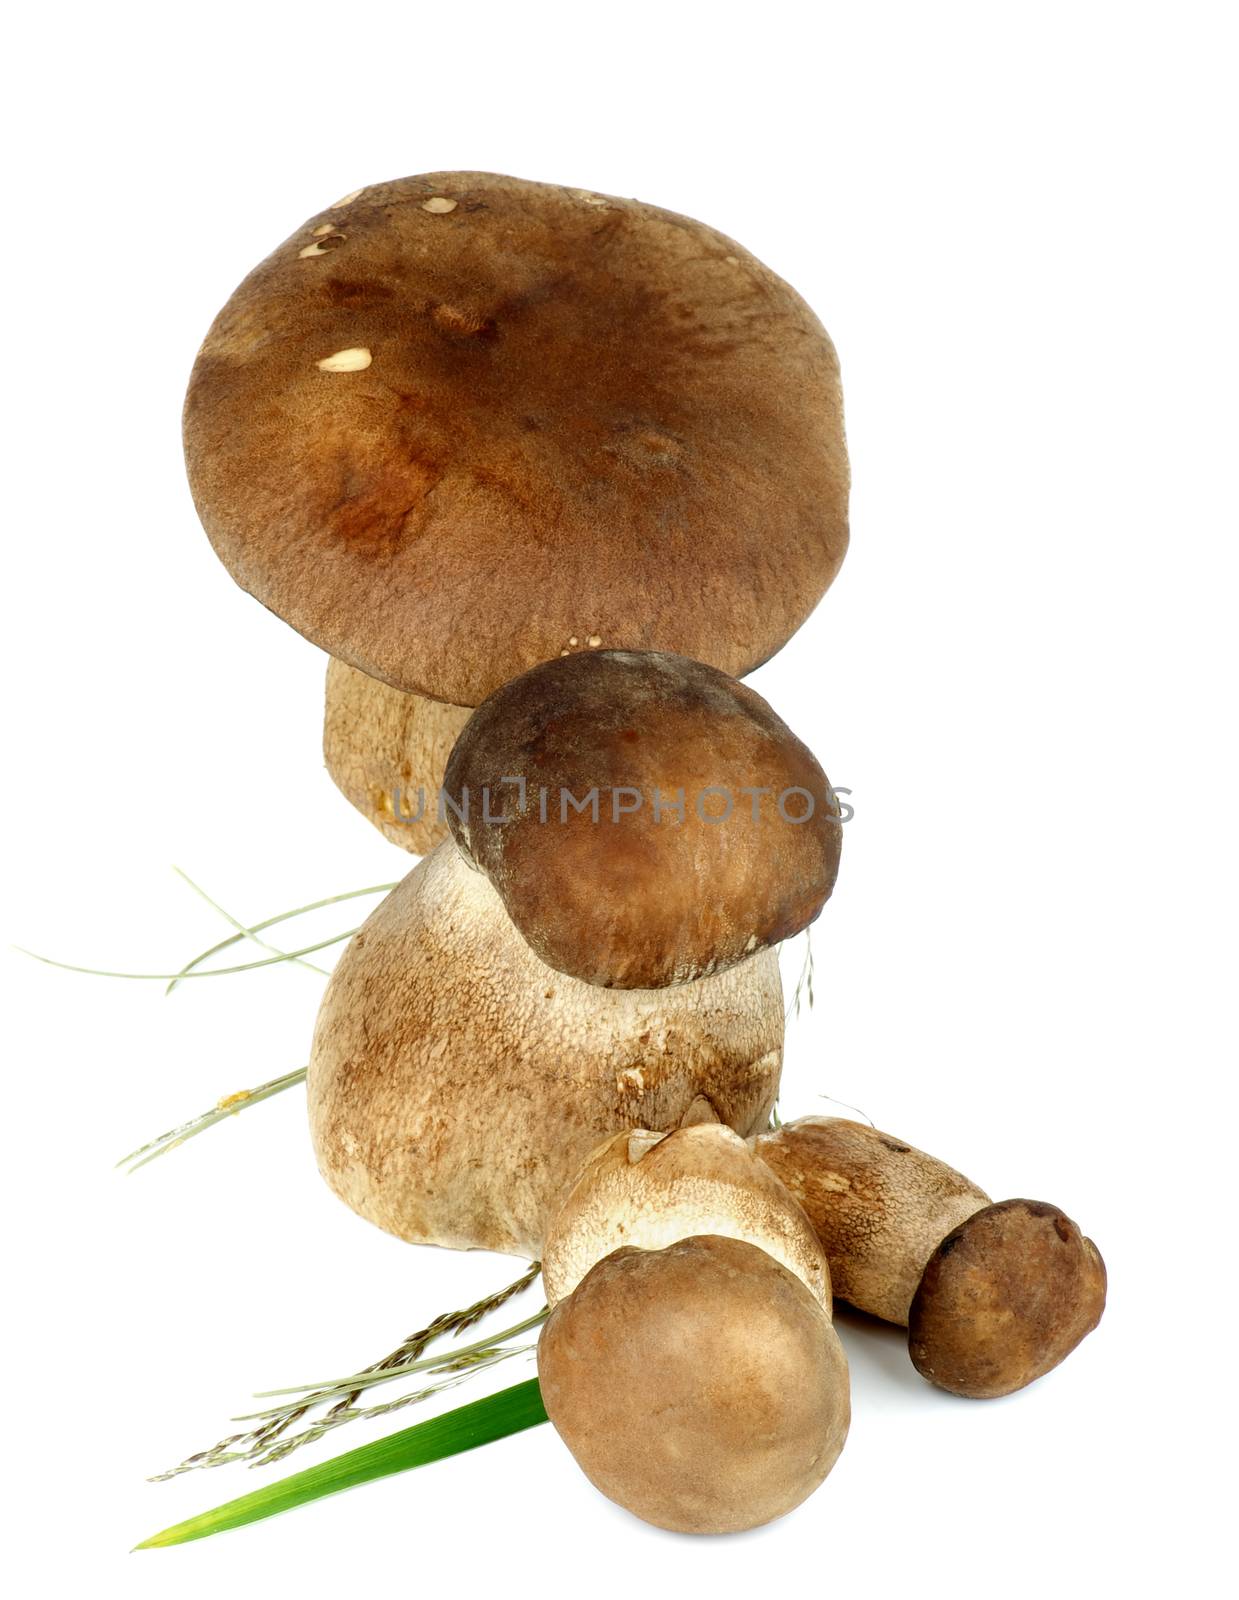 Arrangement of Four Raw Boletus Mushrooms with  Grass and Stems isolated on White background